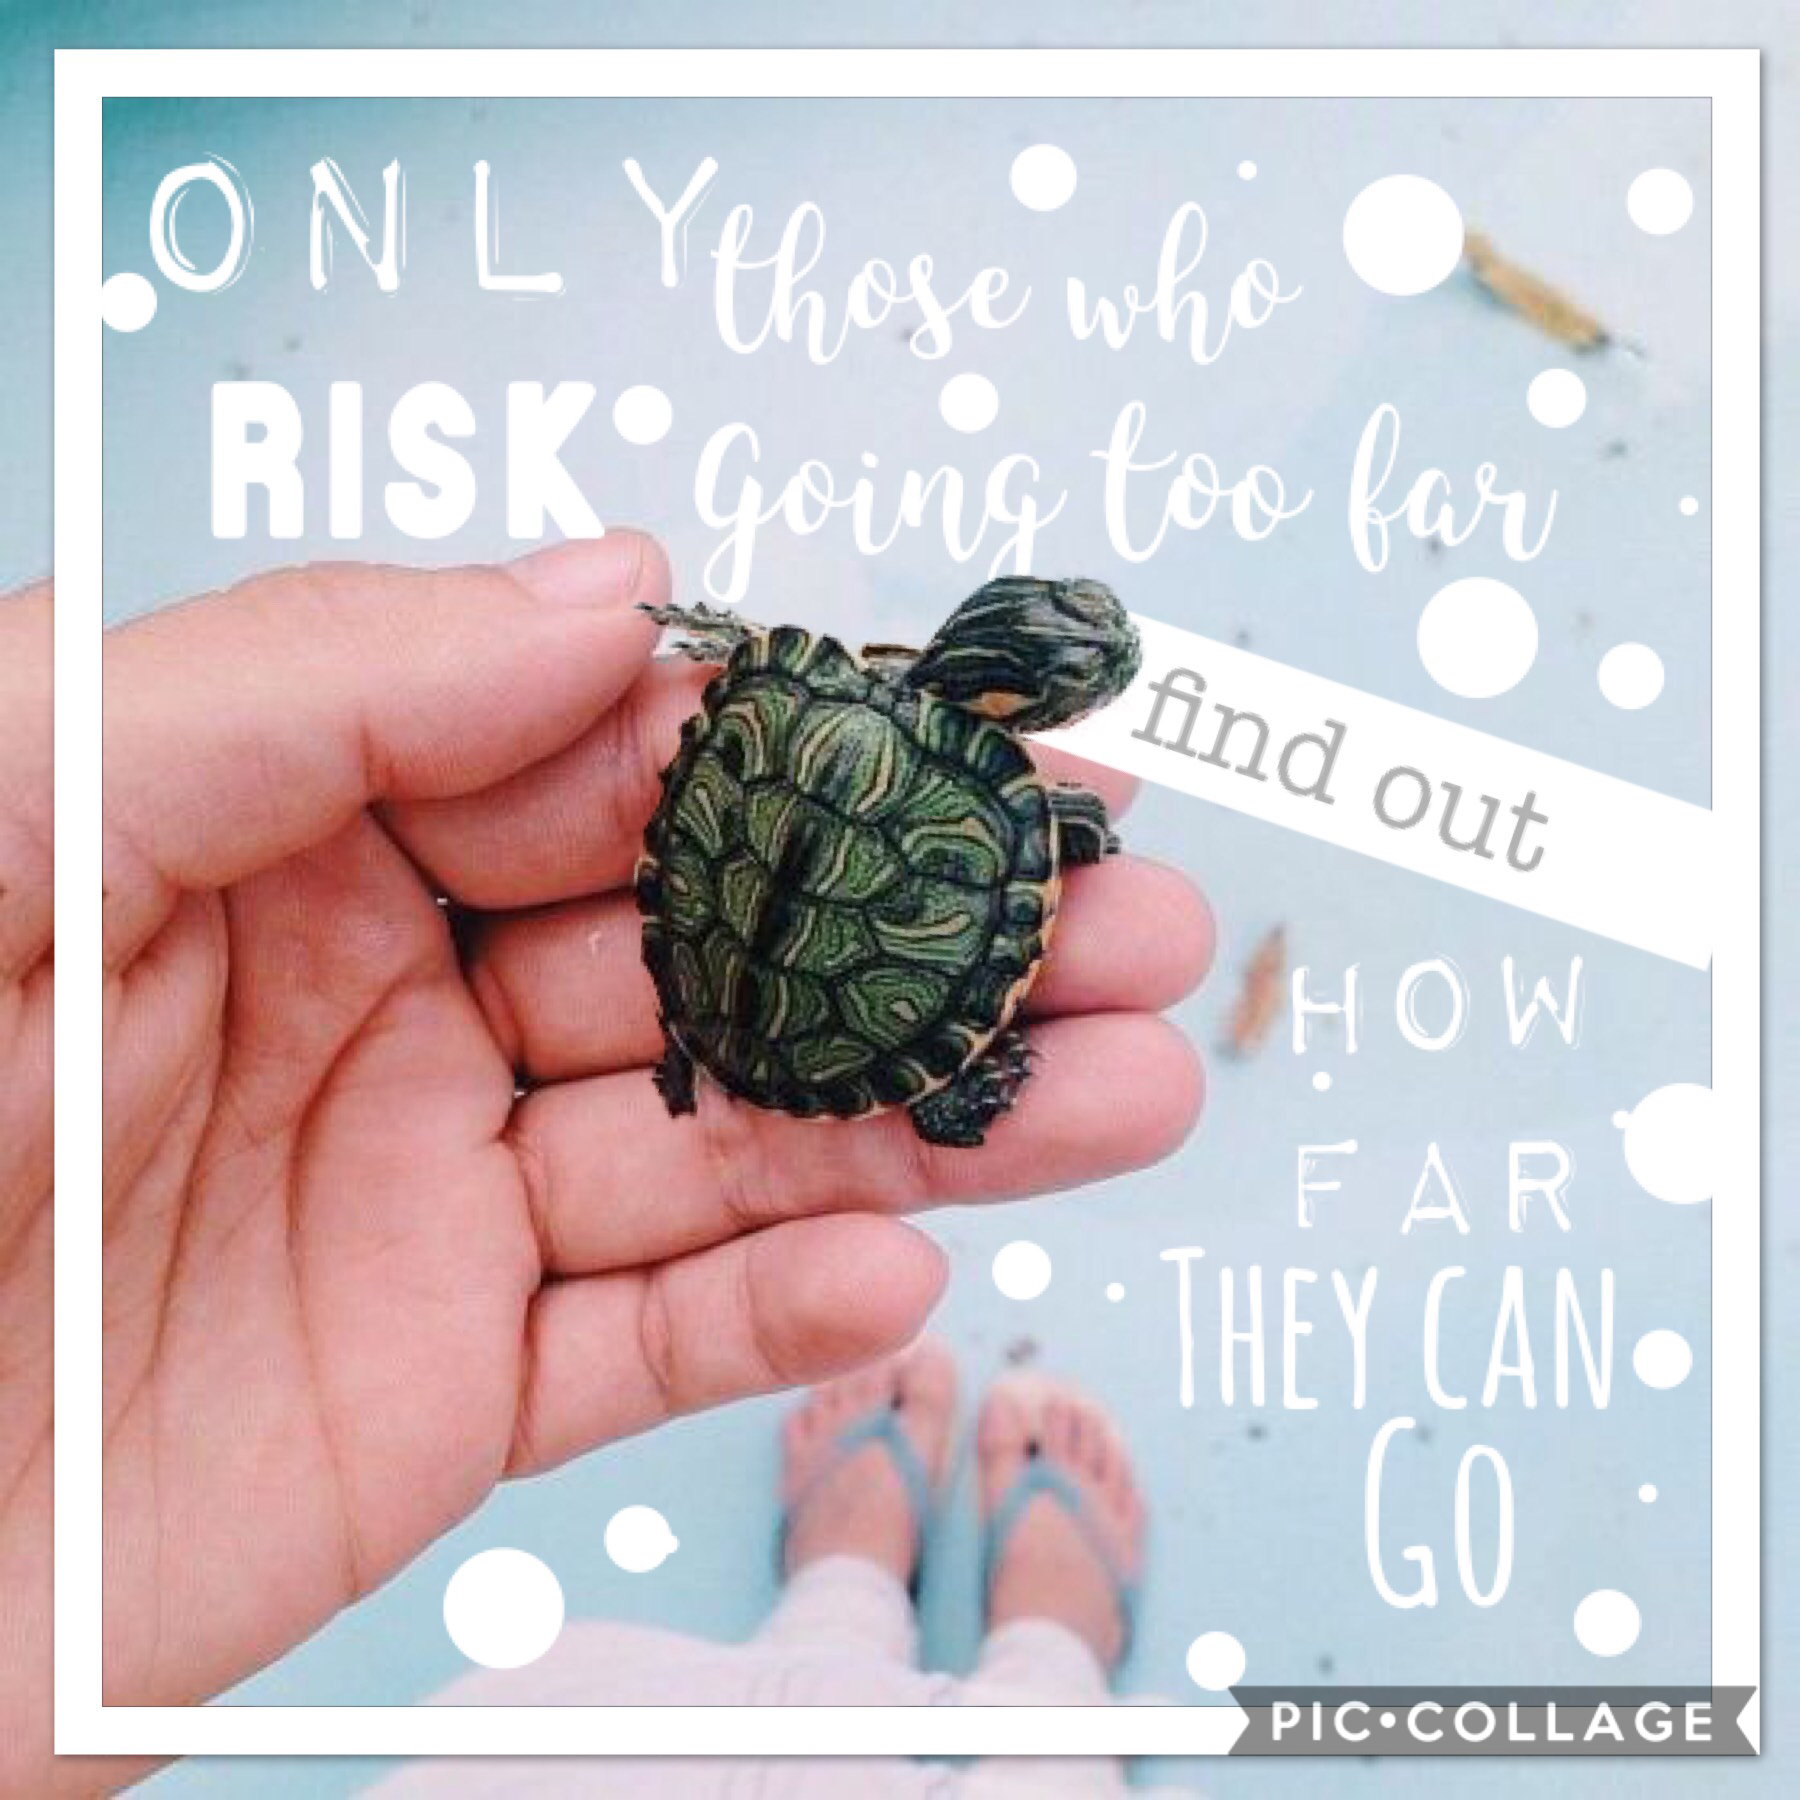 🐢Click the turtles! 🐢
Heyo! So if you want to know what im doing right now, I am sitting on my couch eating a breakfast burrito and drinking hot chocolate! Yep! So yeah! 

QOTD: Whats your favorite drink? 

AOTD: Probably a Shirley temple. Its a cherry fl